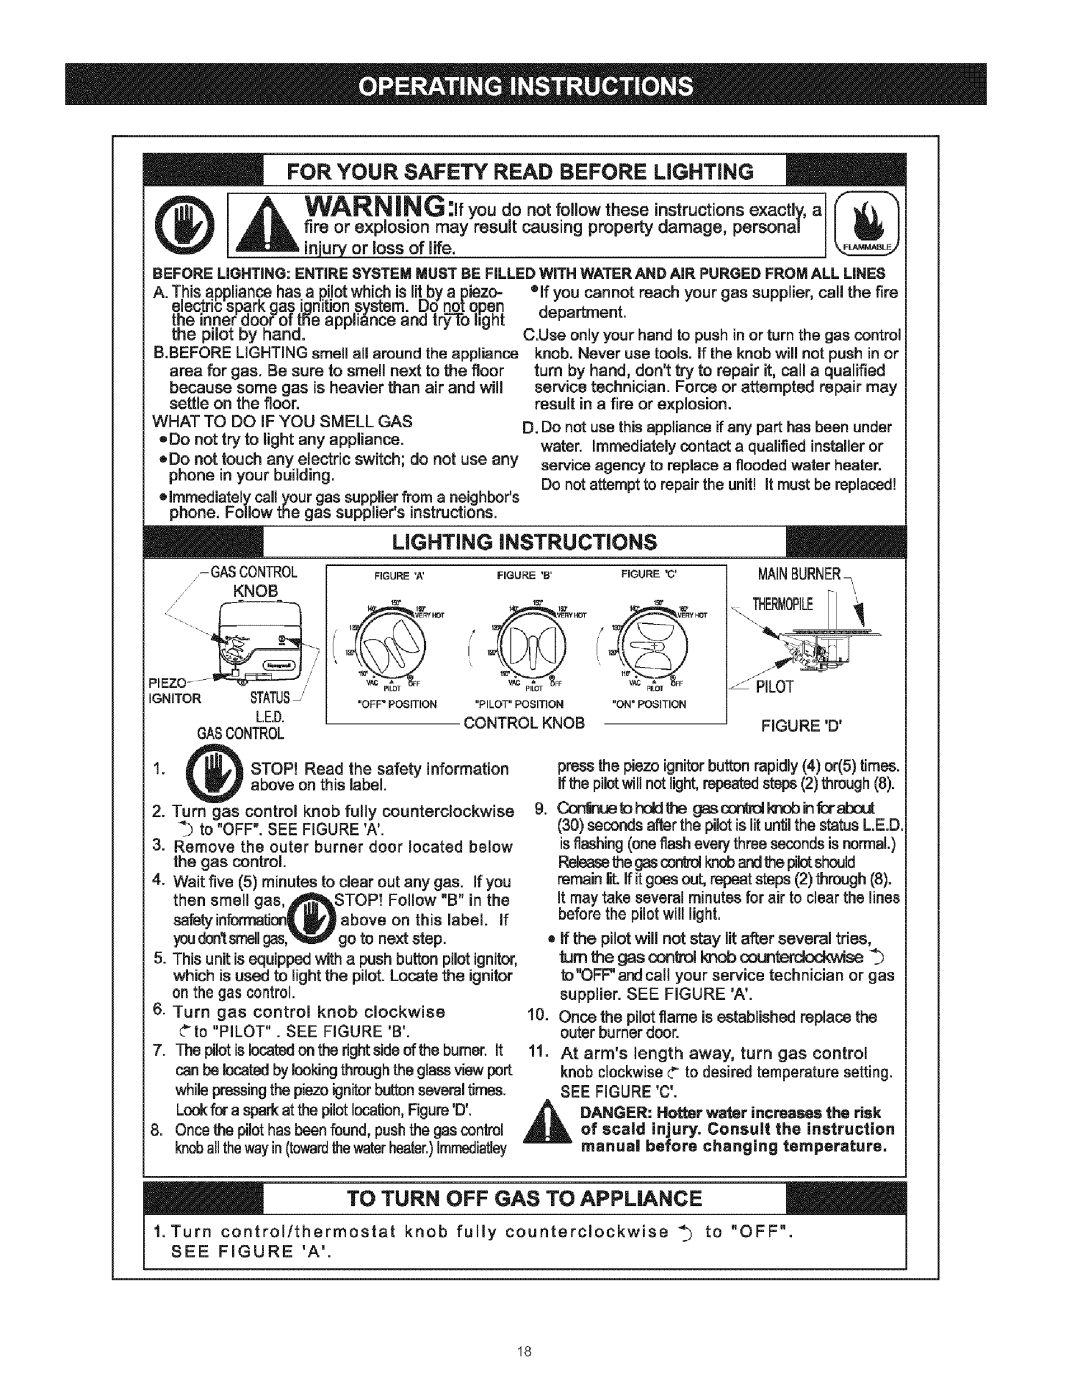 Kenmore 530 LiGHTiNG iNSTRUCTiONS, FOR YOUR SAFETY READ BEFORE LiGHTiNG, To Turn Off Gas To Appliance, the instruction 